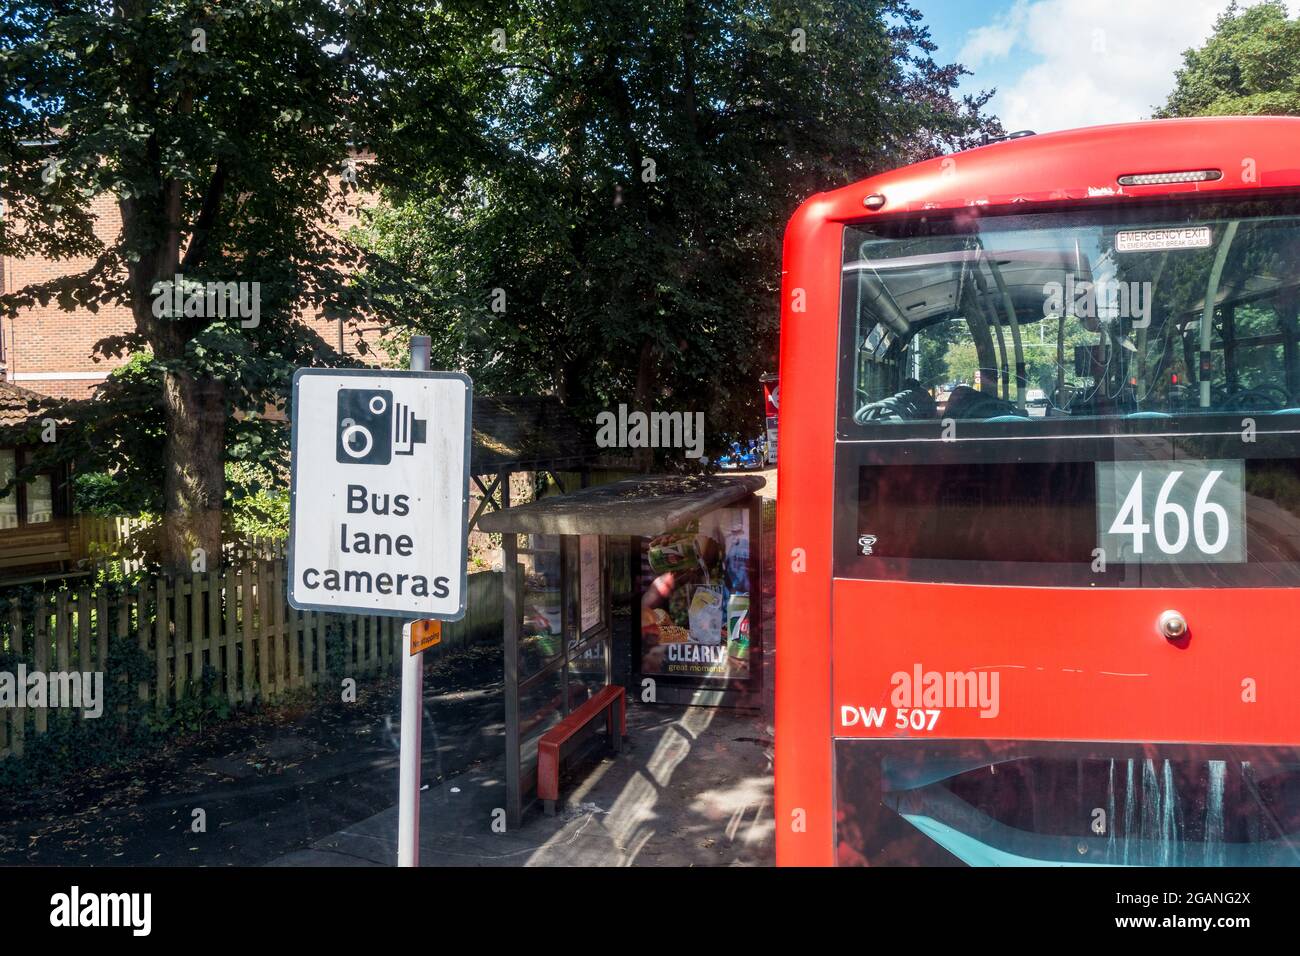 Bus lane camera board and a Red London bus in frame Stock Photo